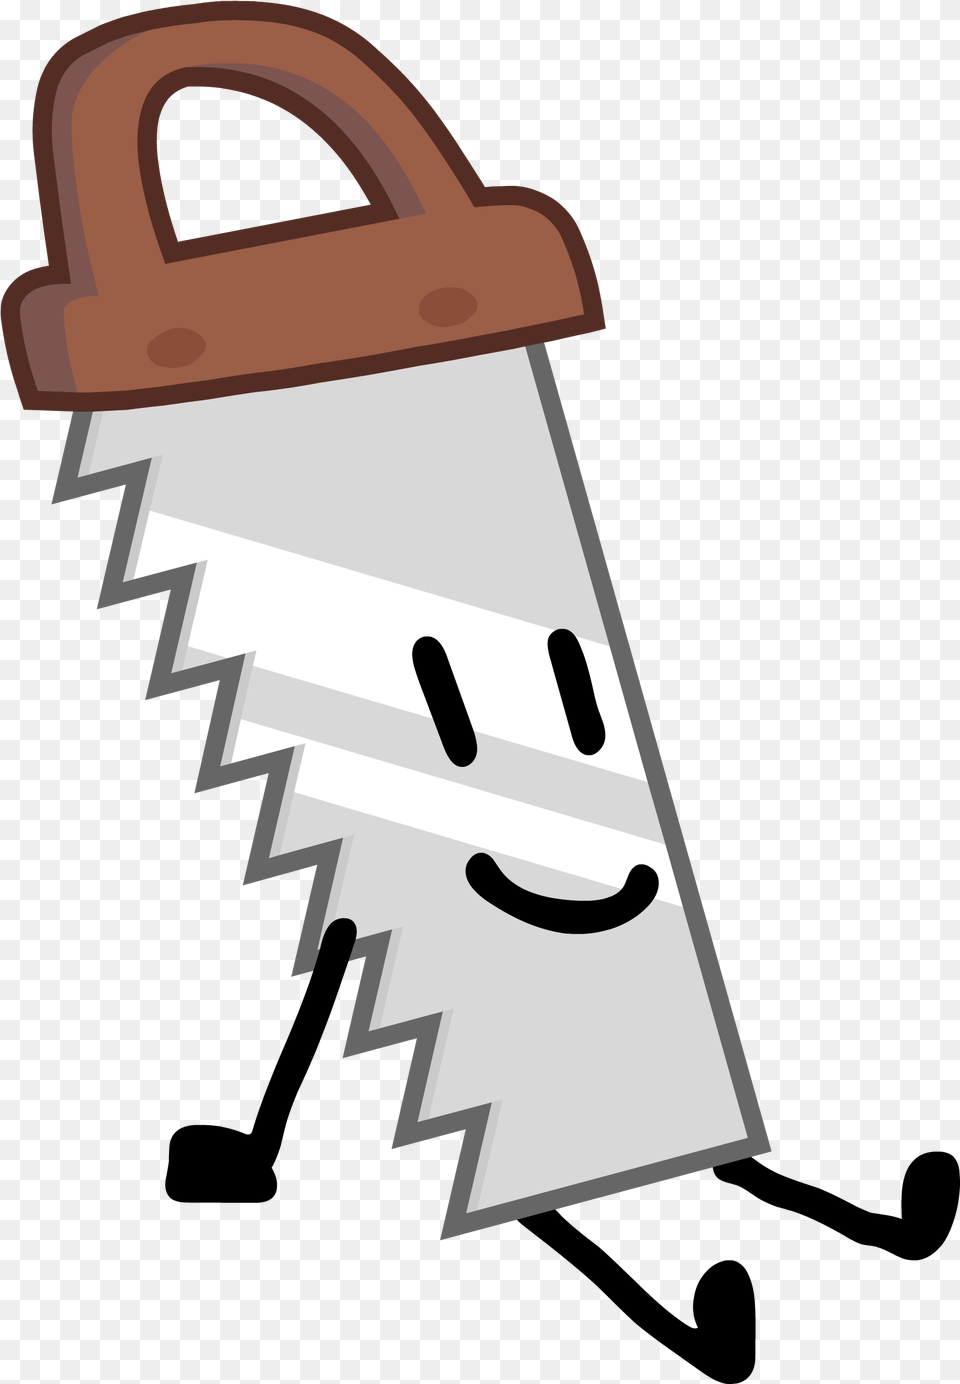 Saw Is Really Cool Saw Bfdi, Device, Handsaw, Tool Png